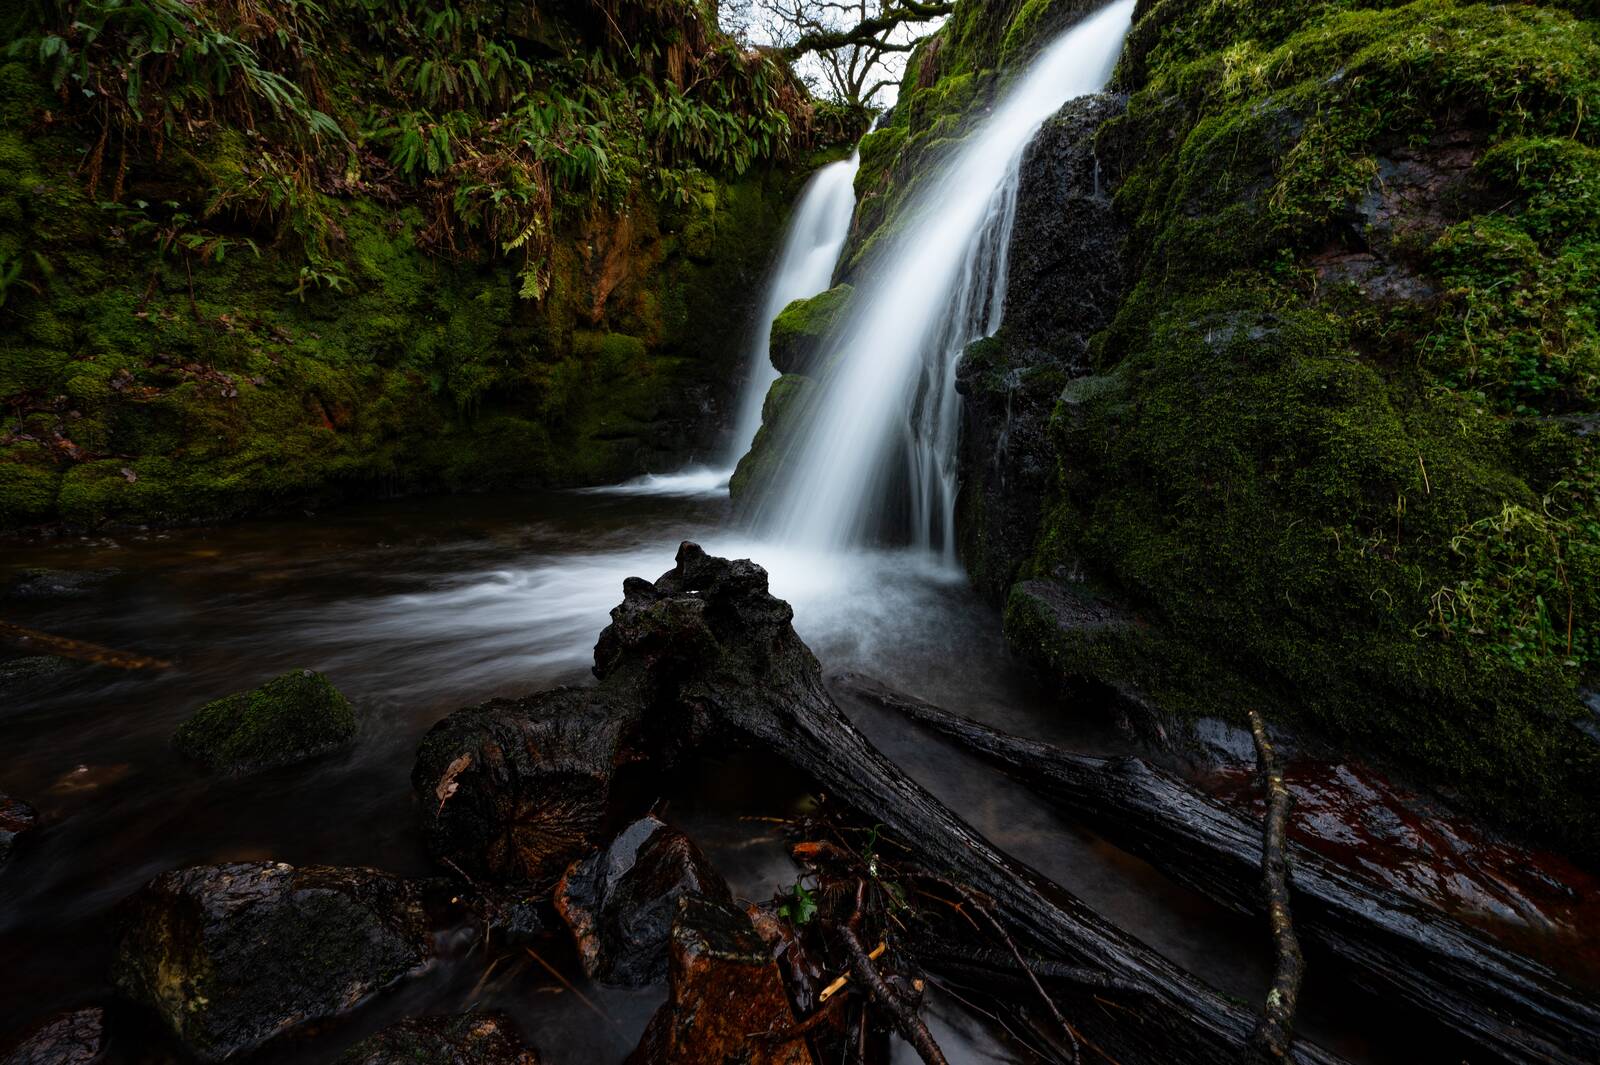 Image of Venford Falls by Andrew Heard